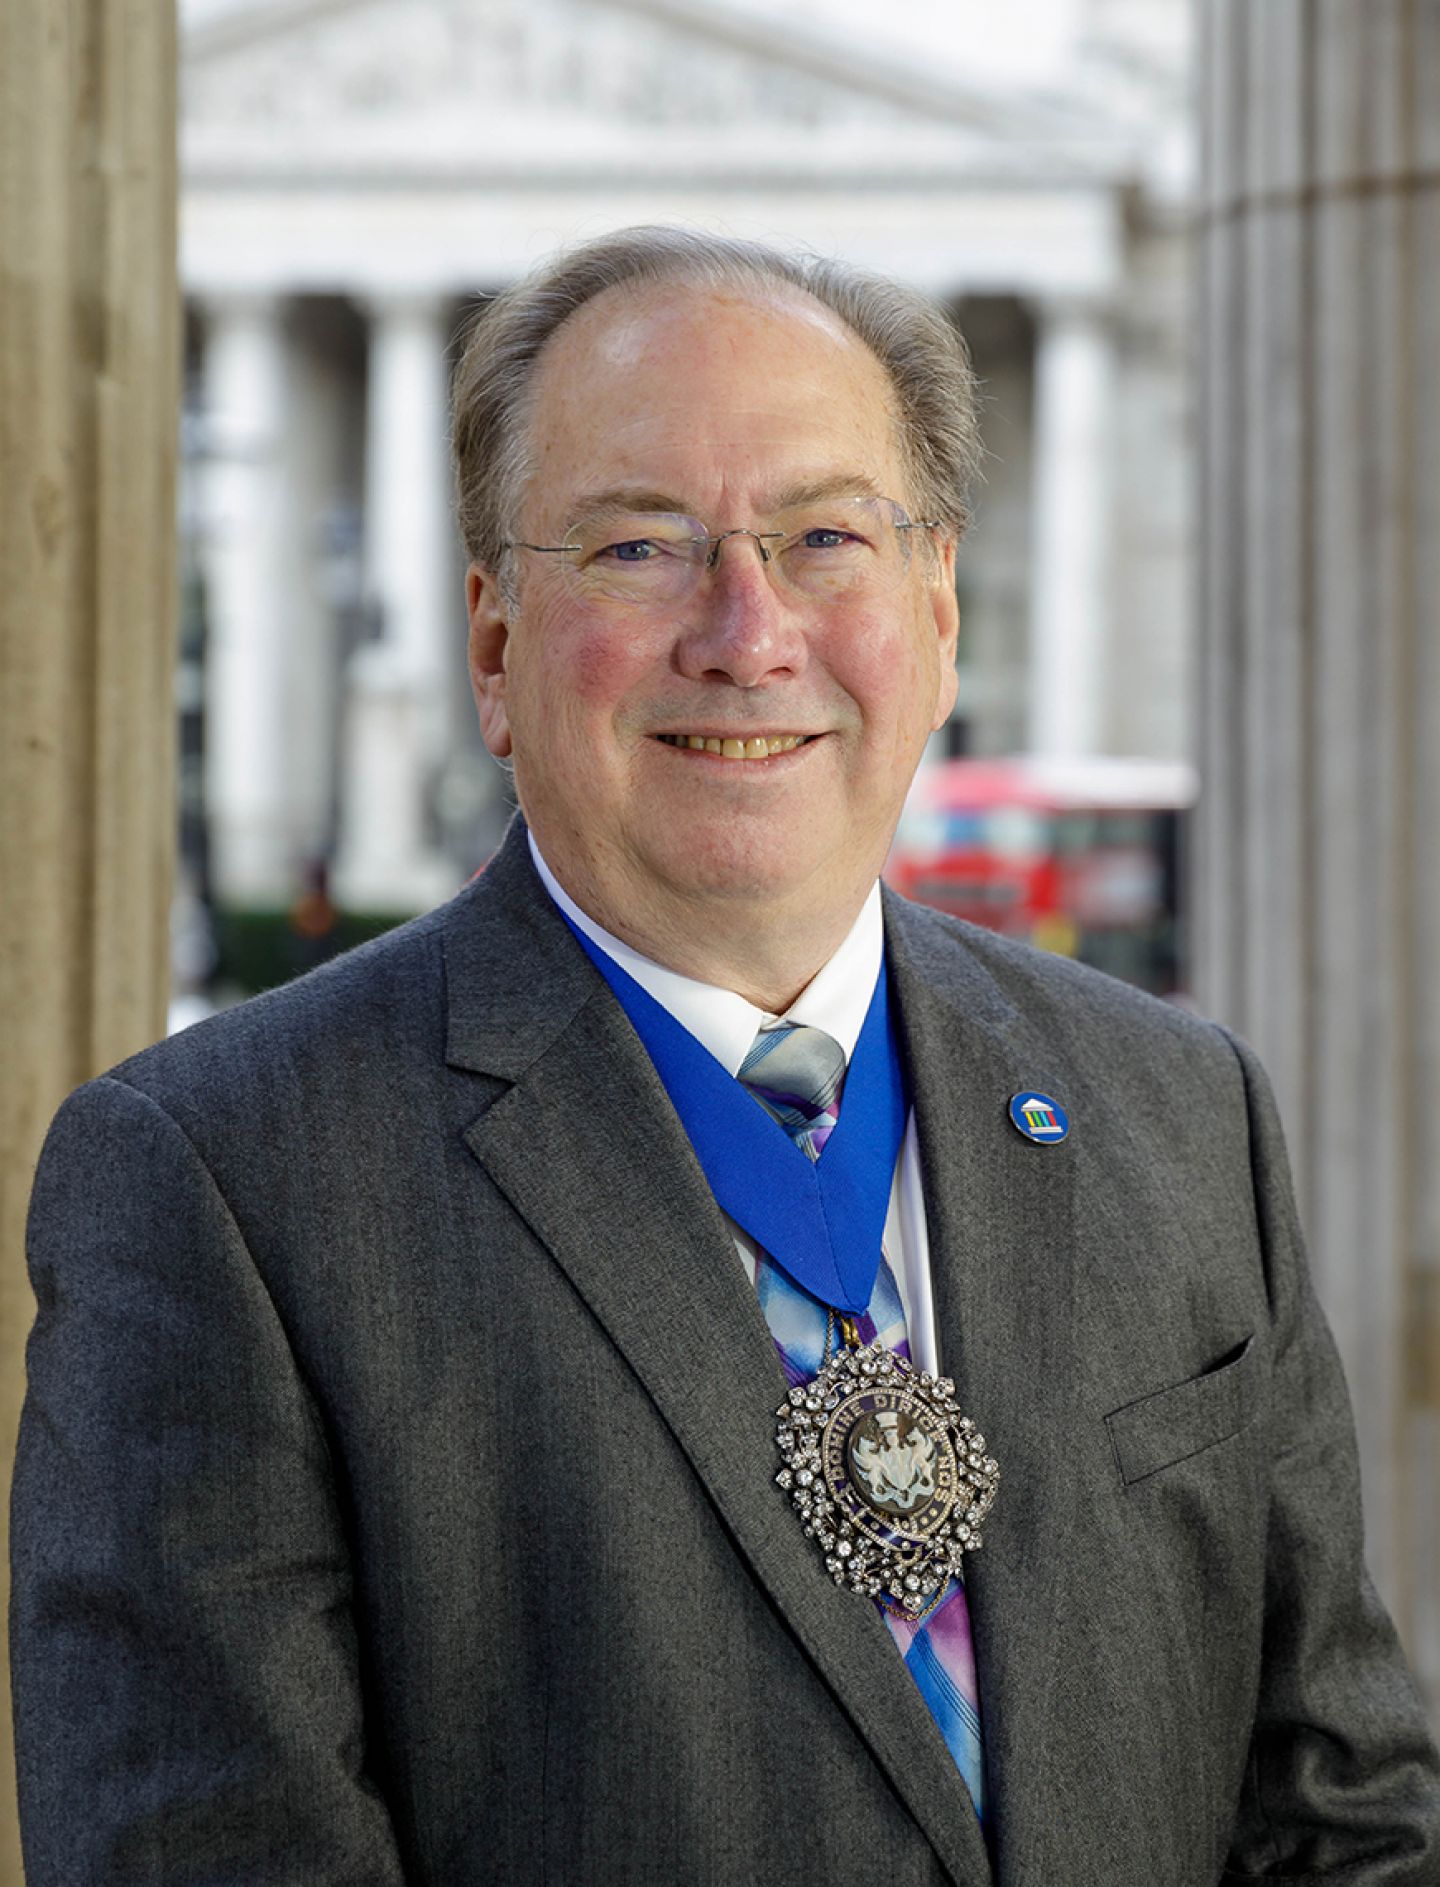 Michael Mainelli is the Rector of City, University of London